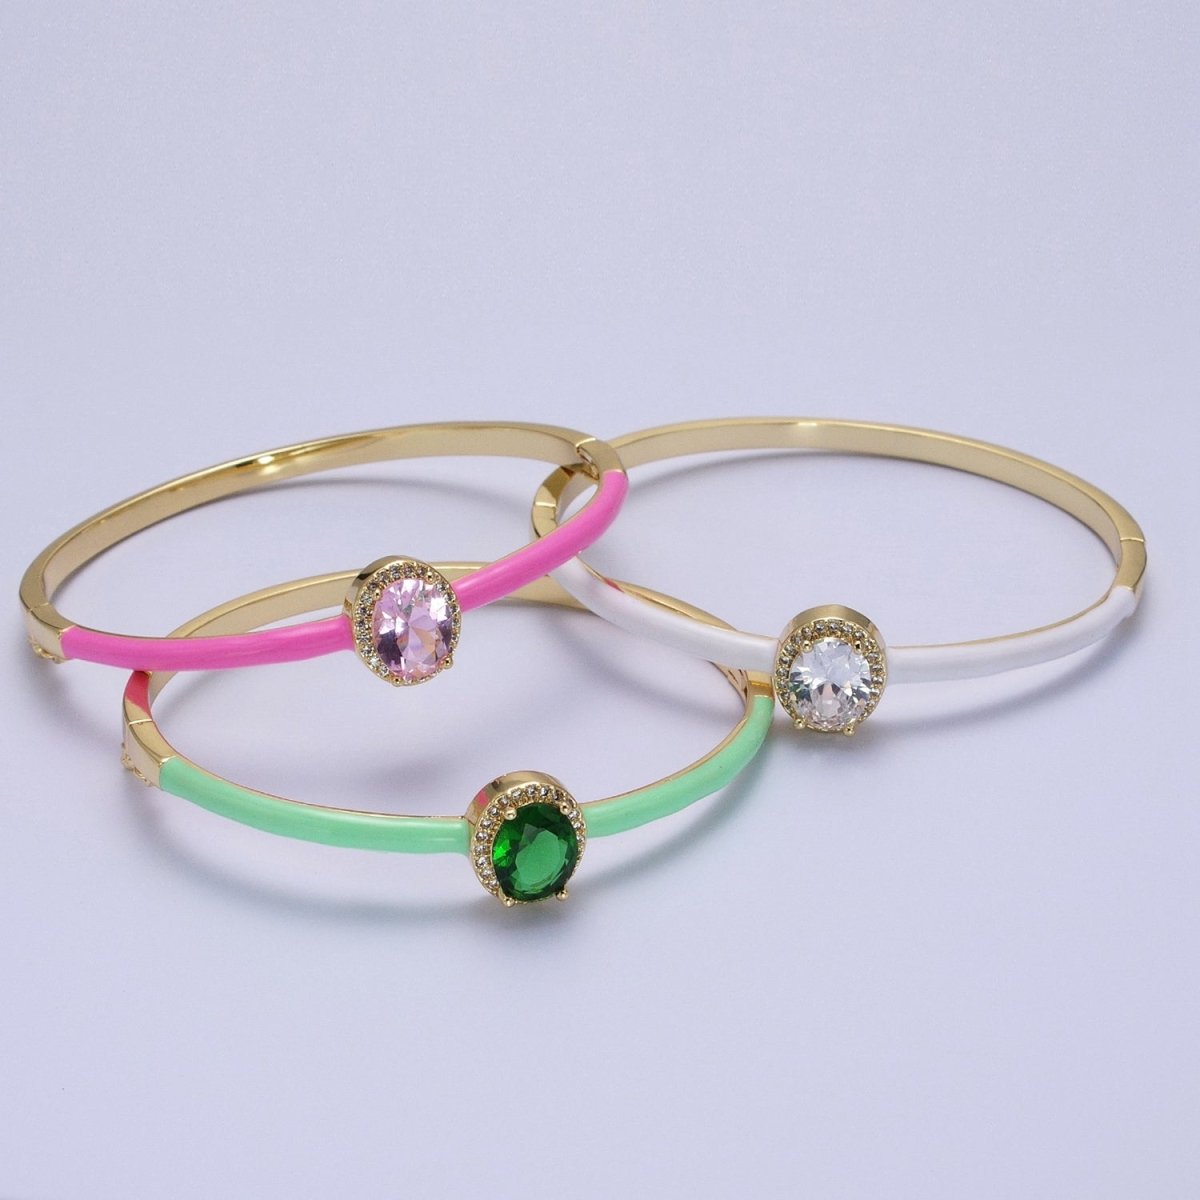 Barbie core Gold Filled Oval White, Green, Pink Micro Paved Enamel Gold Bangle Bracelet | WA-1348 - WA-1350 Clearance Pricing - DLUXCA